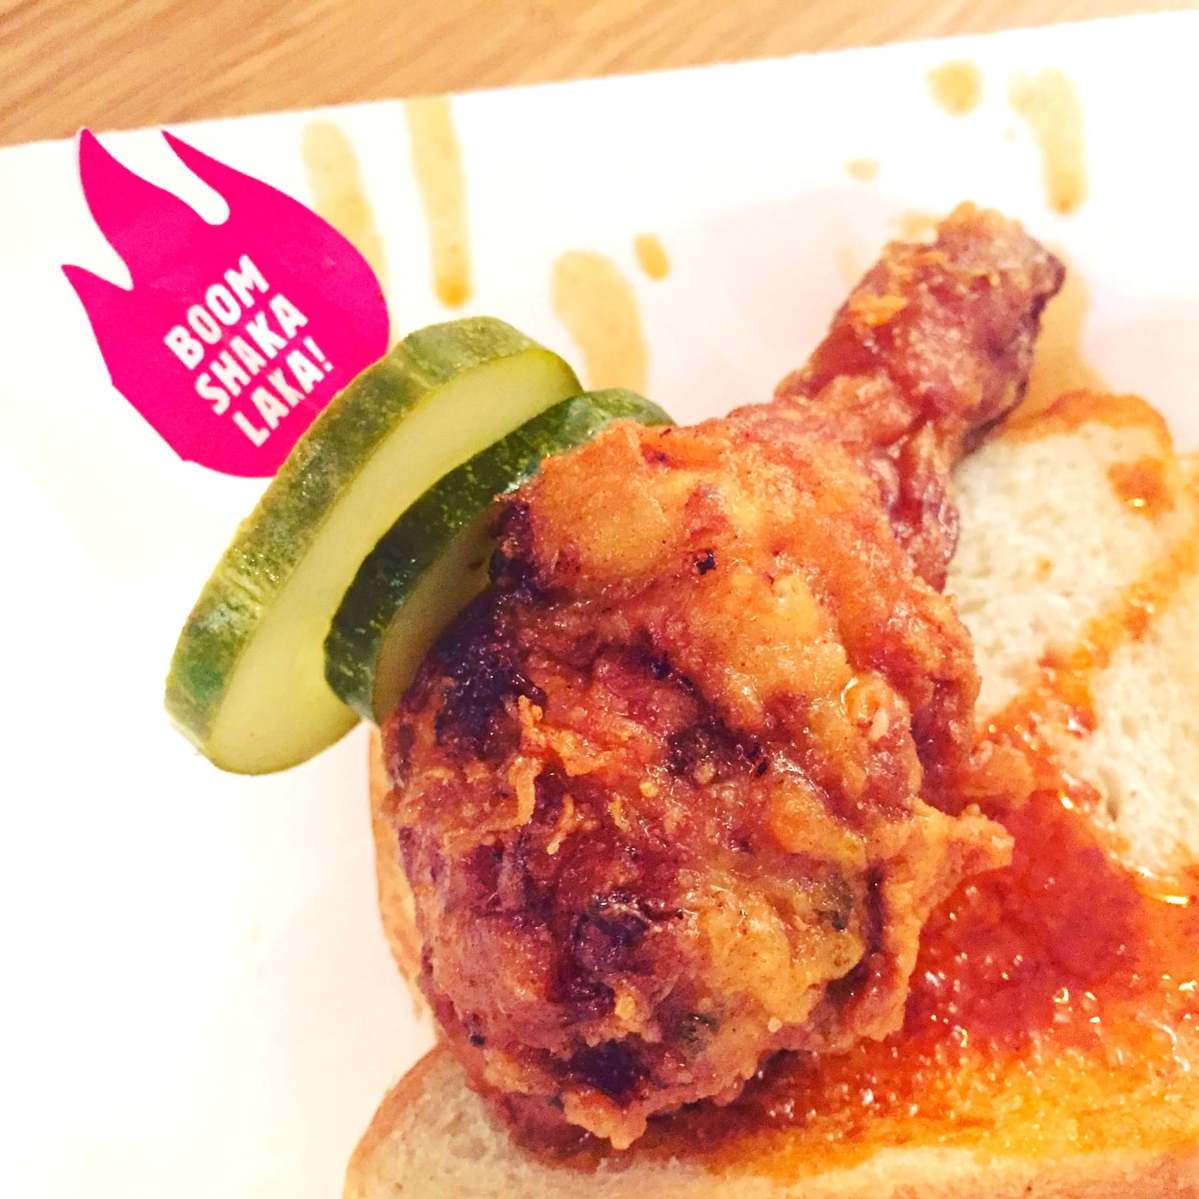 How hot is the Boomshakalaka chicken at Carla Hall’s Southern Kitchen?